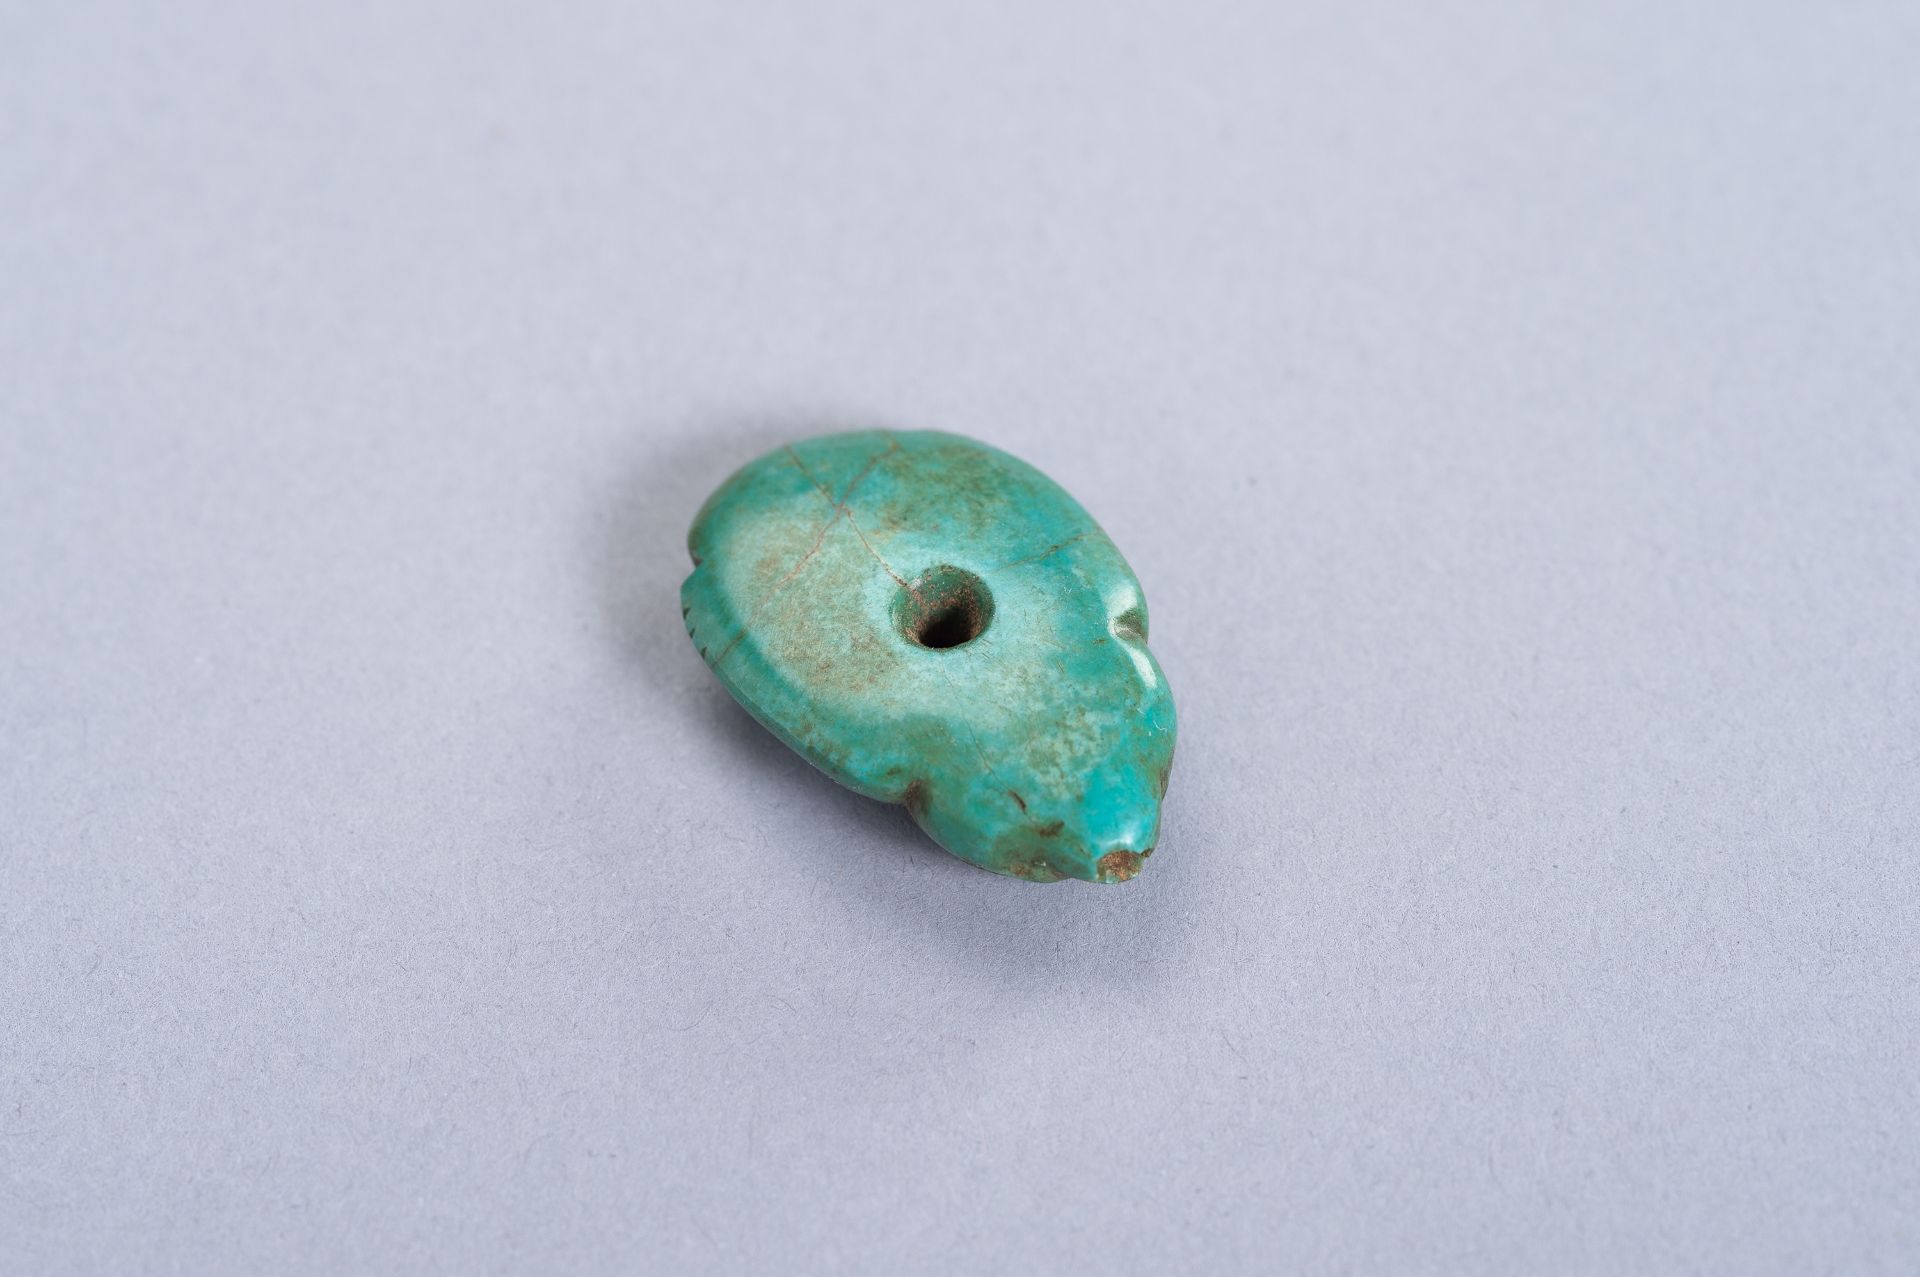 A TURQUOISE PENDANT OF A BIRD - Image 7 of 7